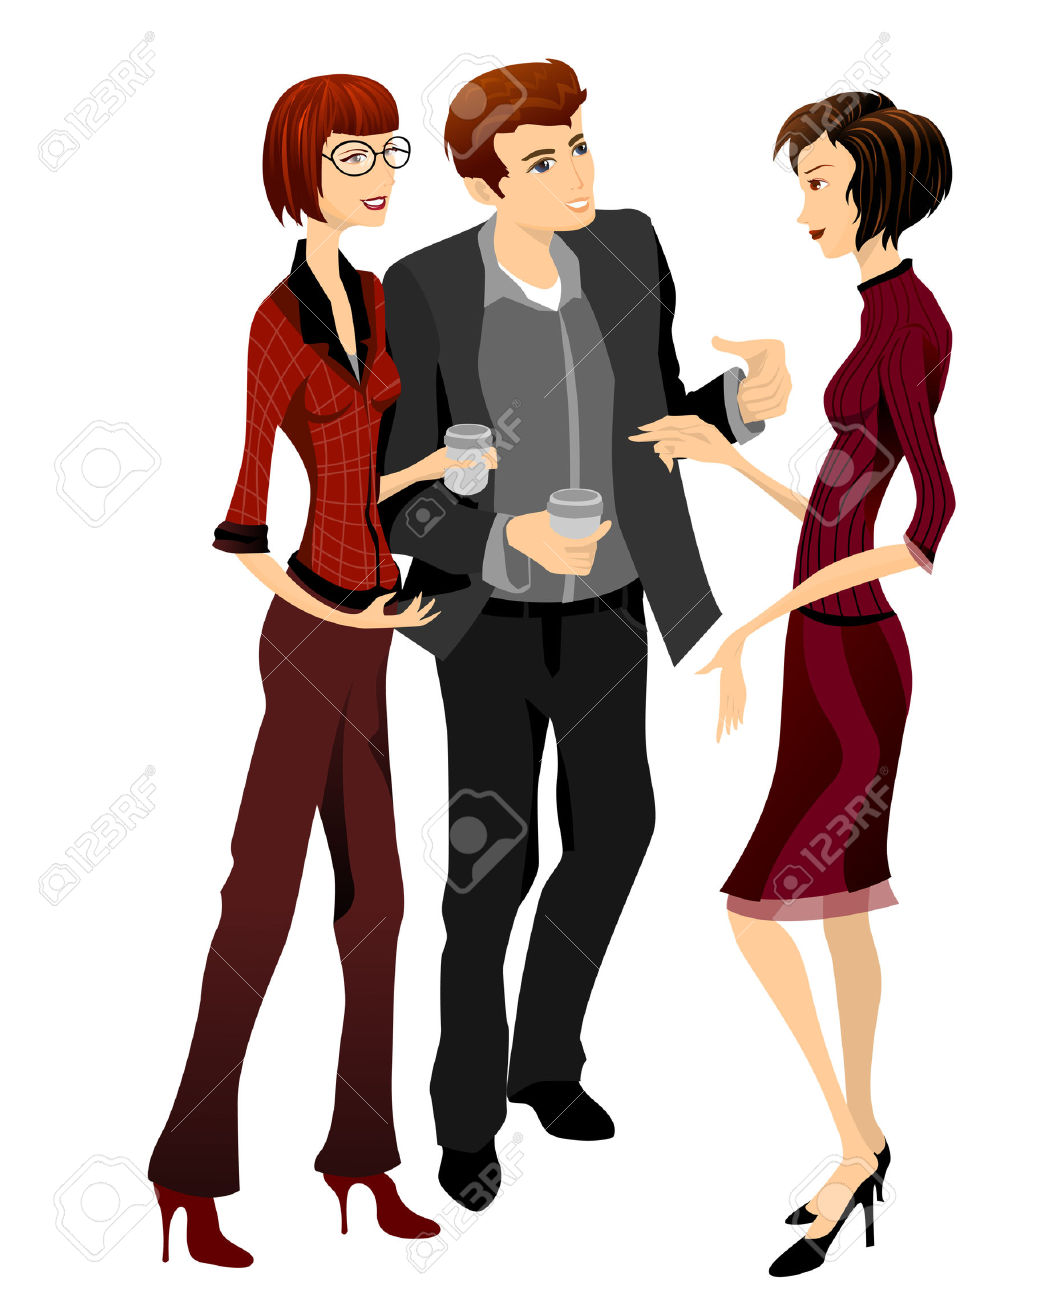 People Socializing Cliparts Free download on ClipArtMag